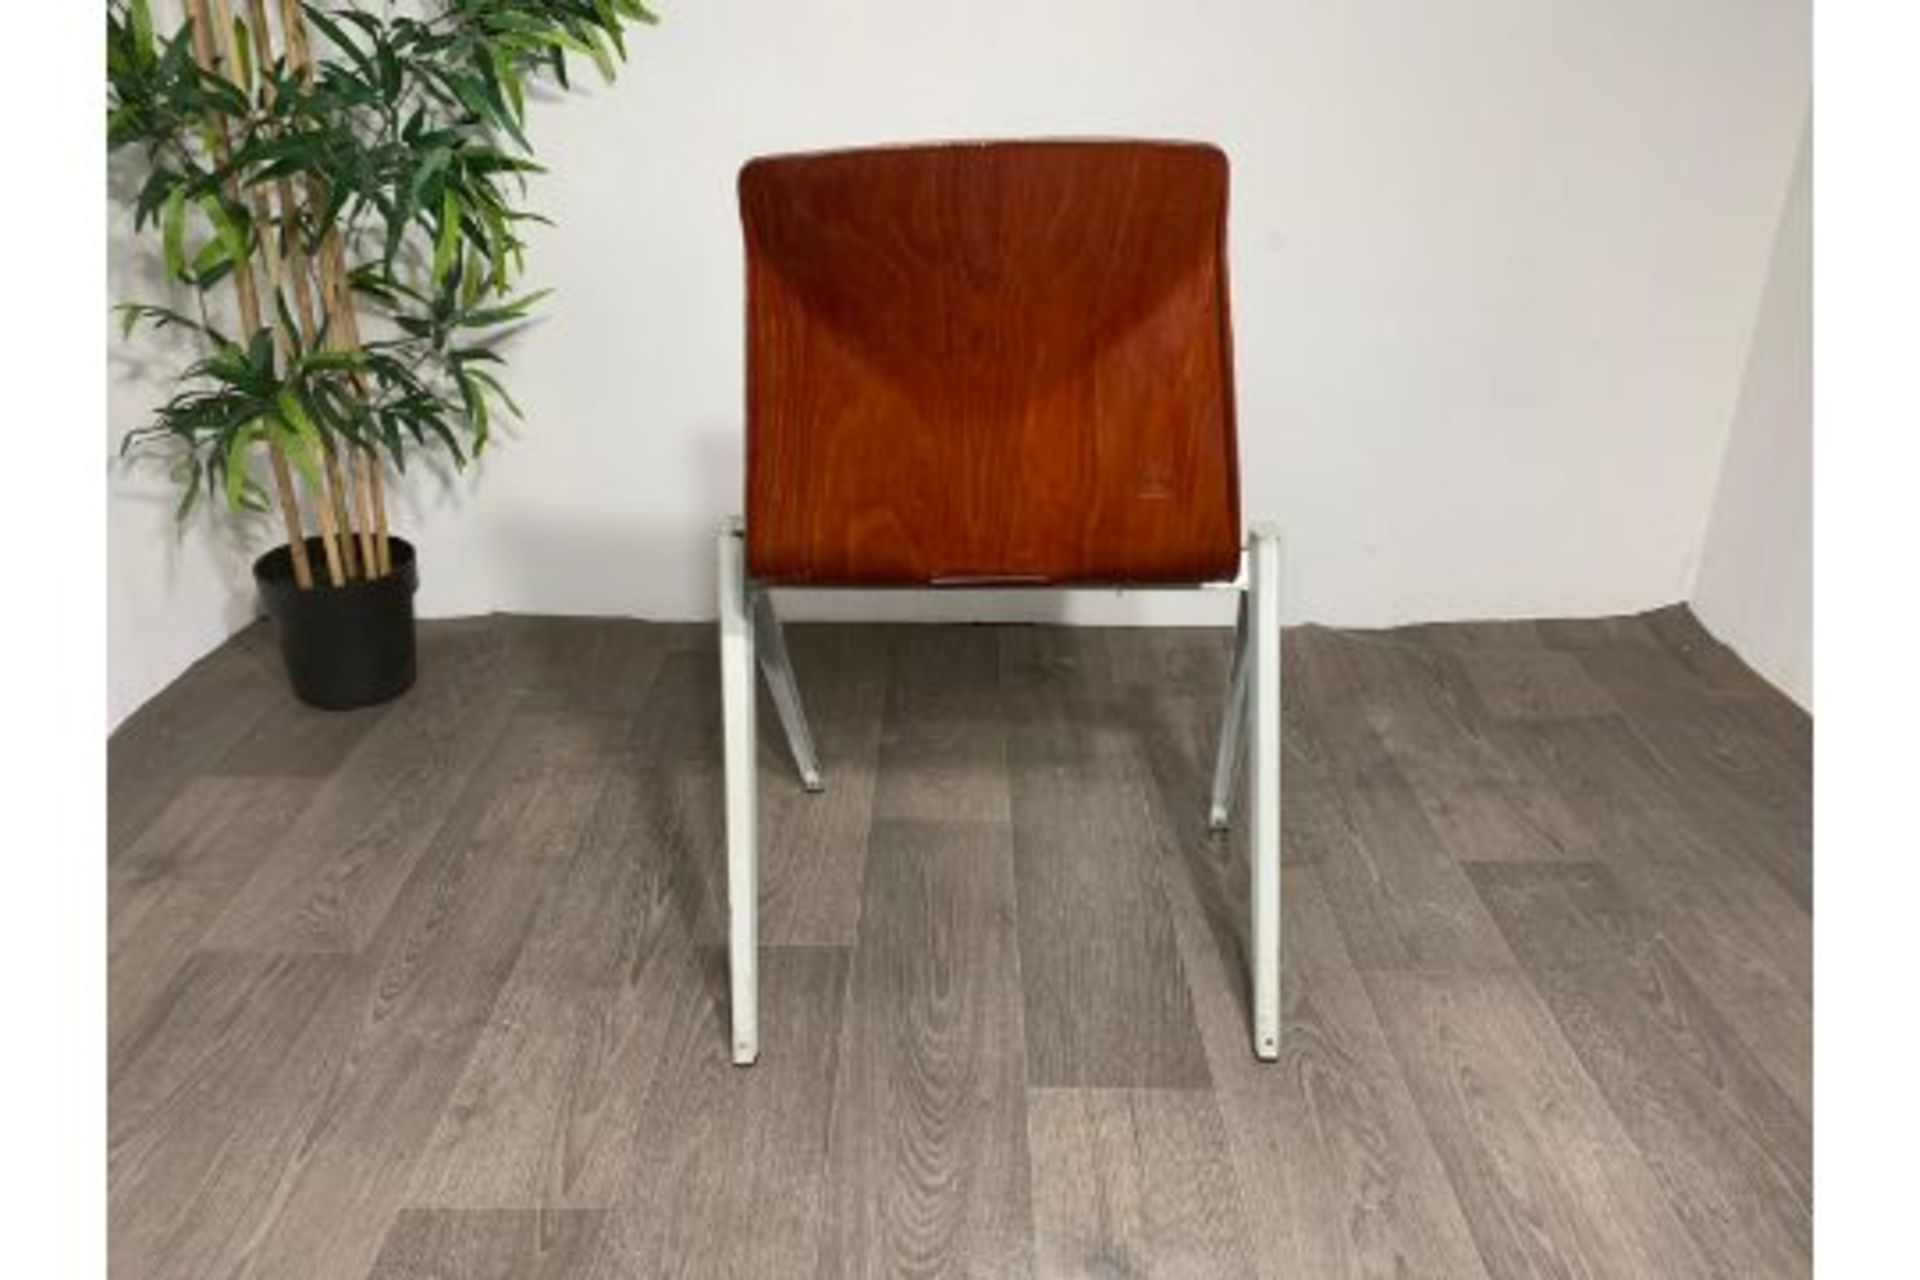 Thur Op Seat Stackable Chair in mahogany resin x2 - Image 5 of 6